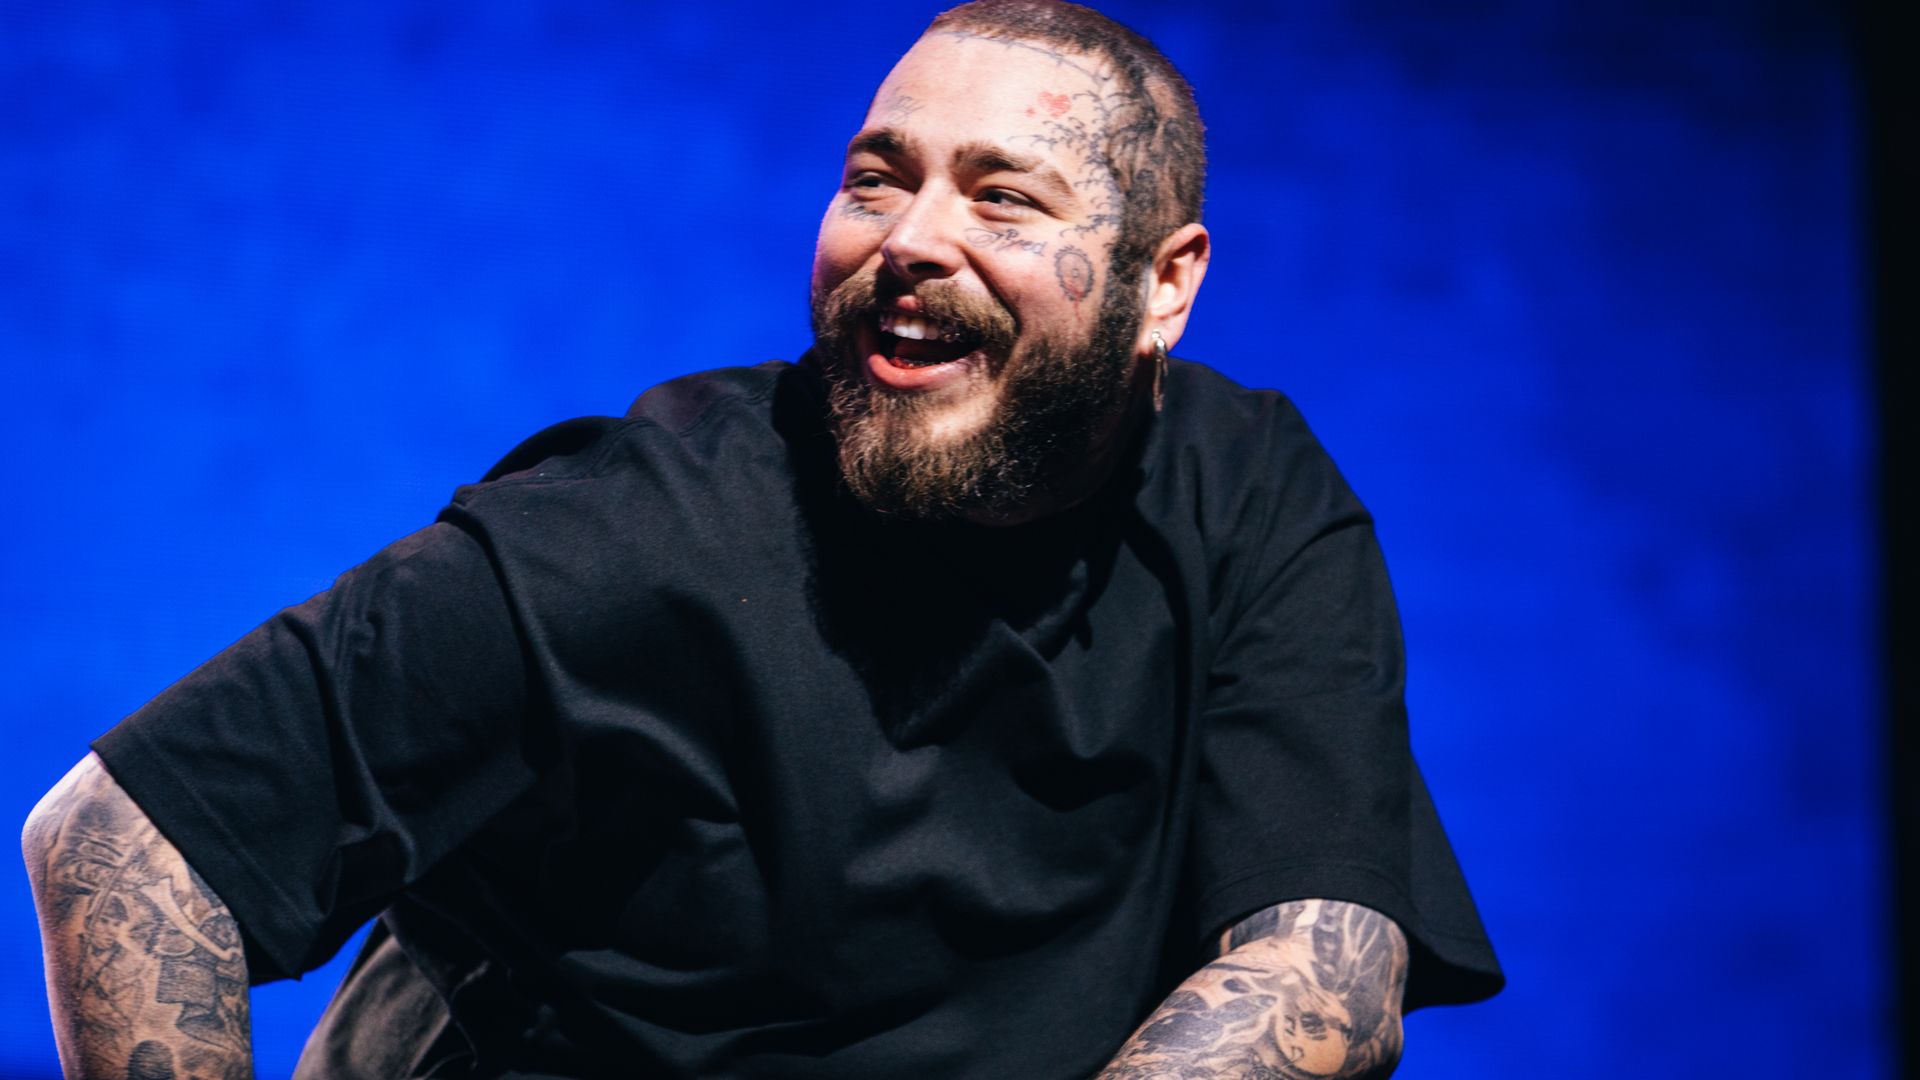 All we know about Post Malone's home life including his very private fiancee and baby daughter